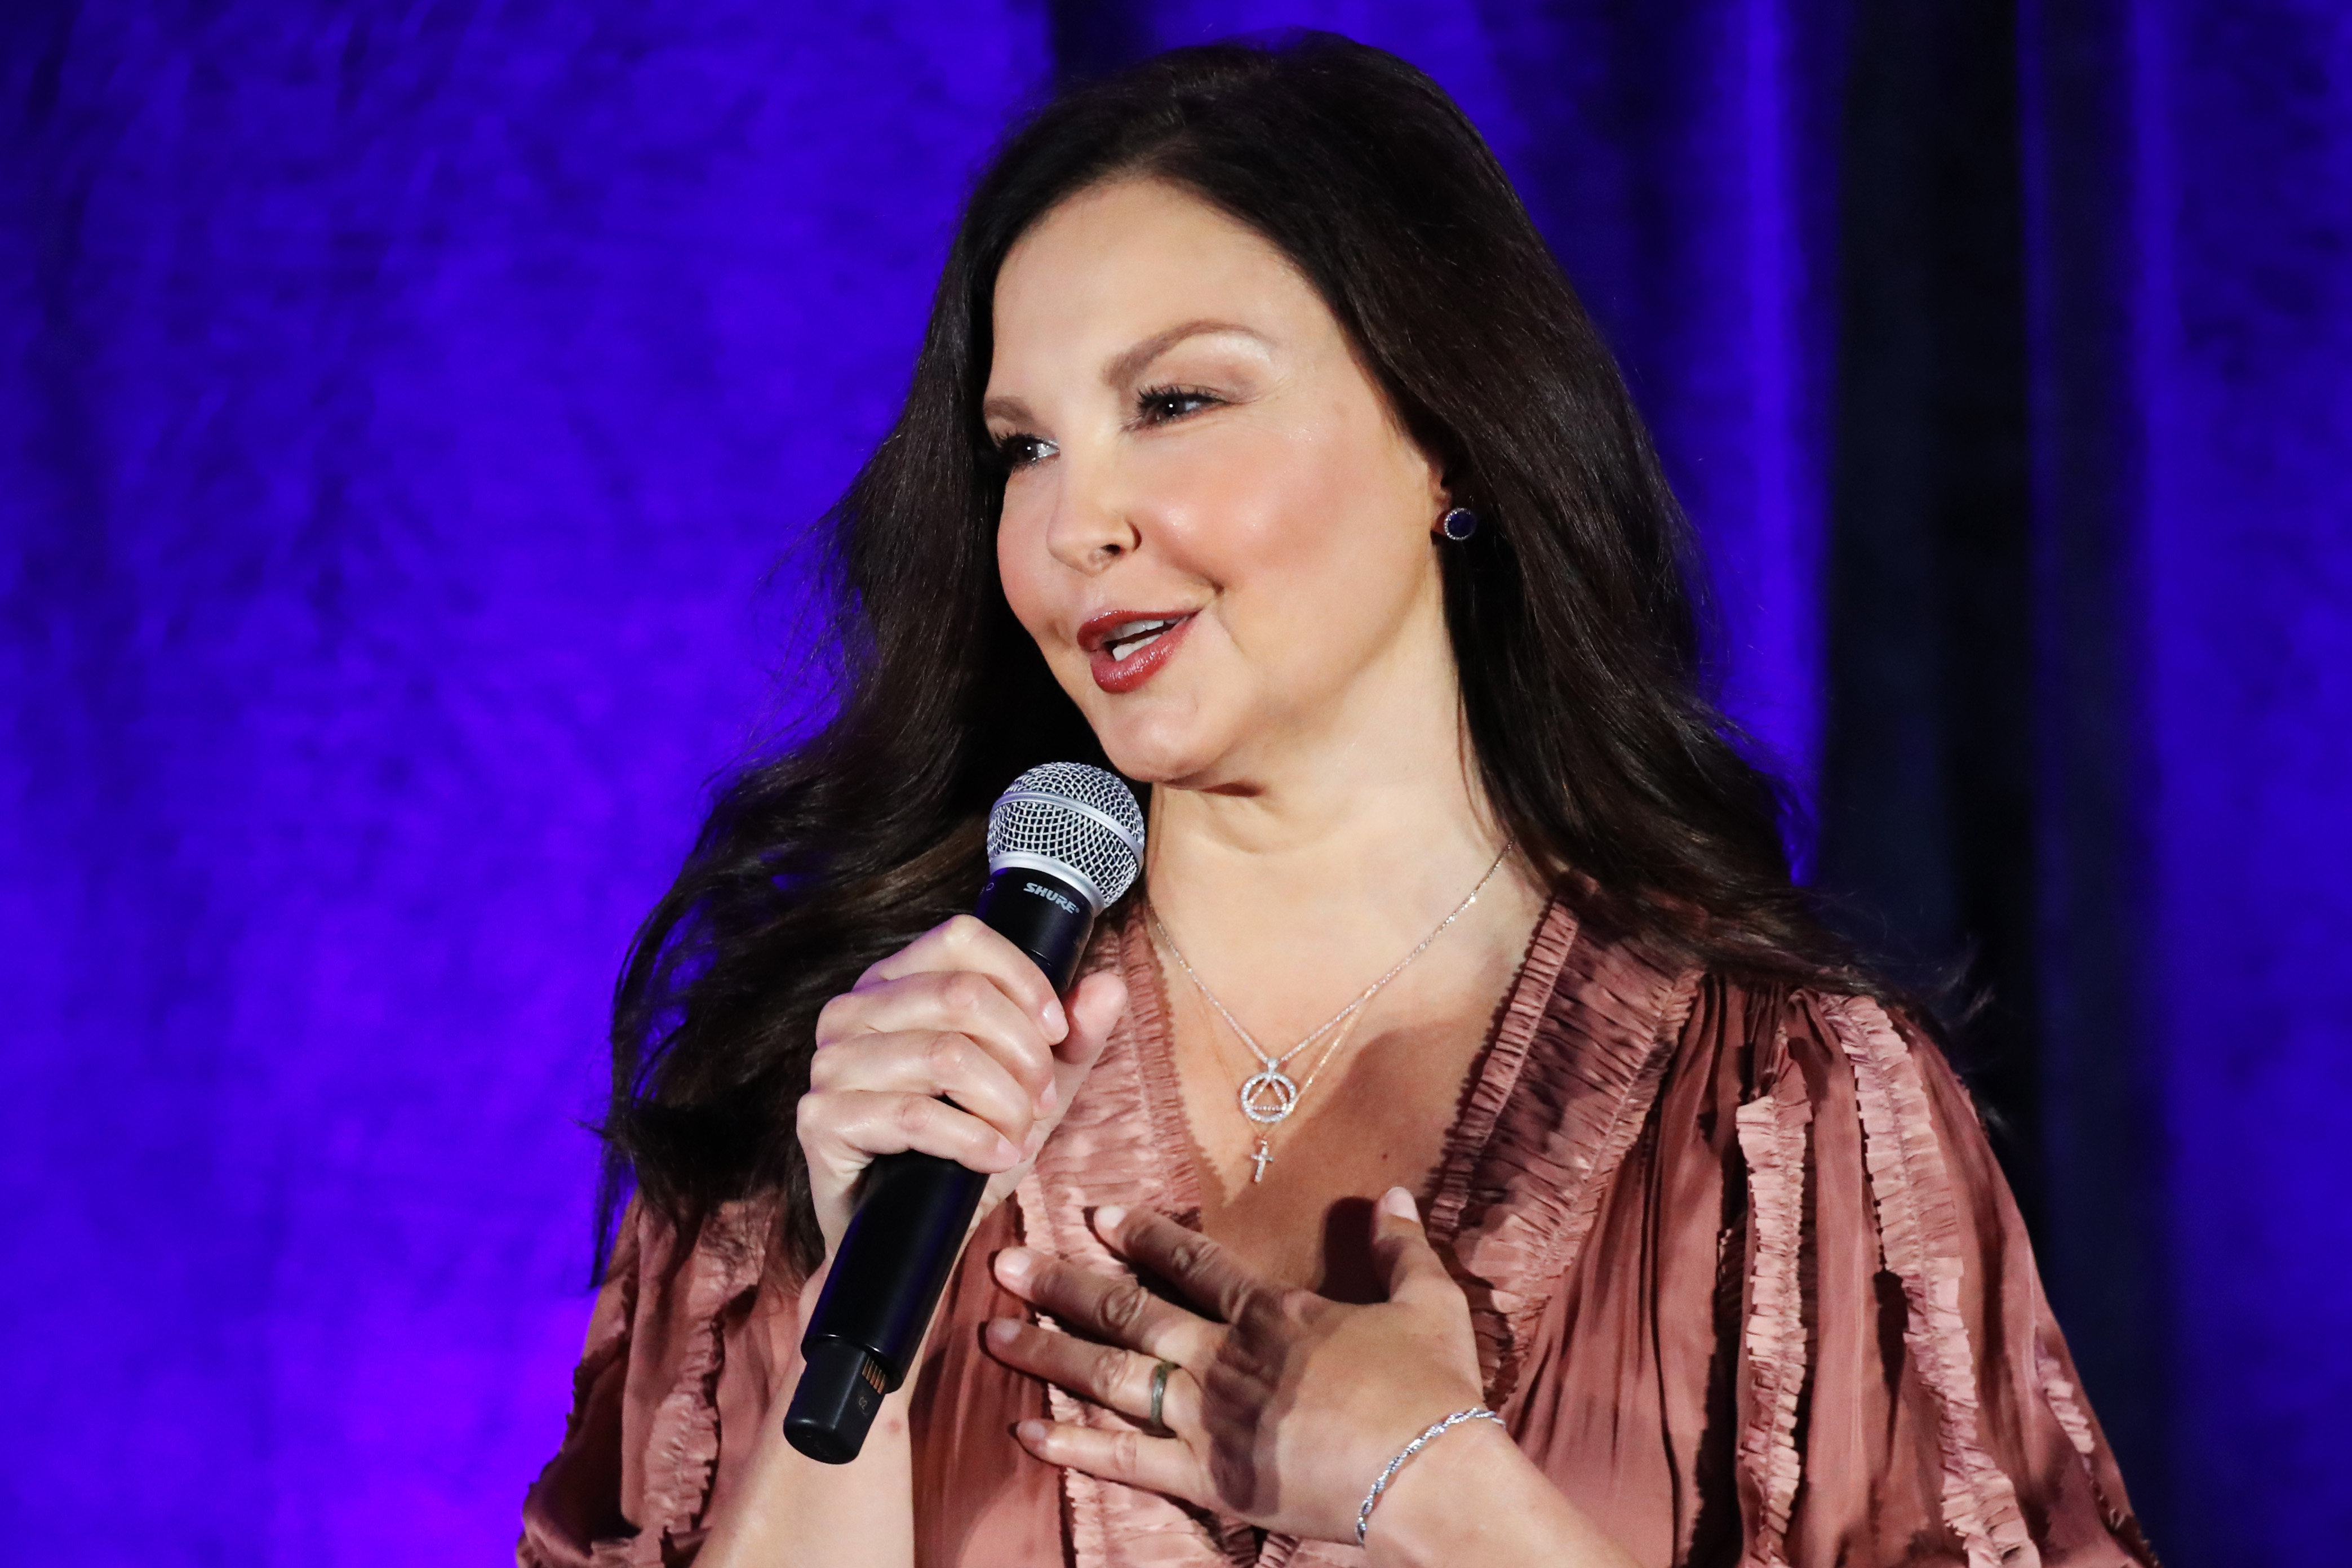 Ashley Judd's face accident